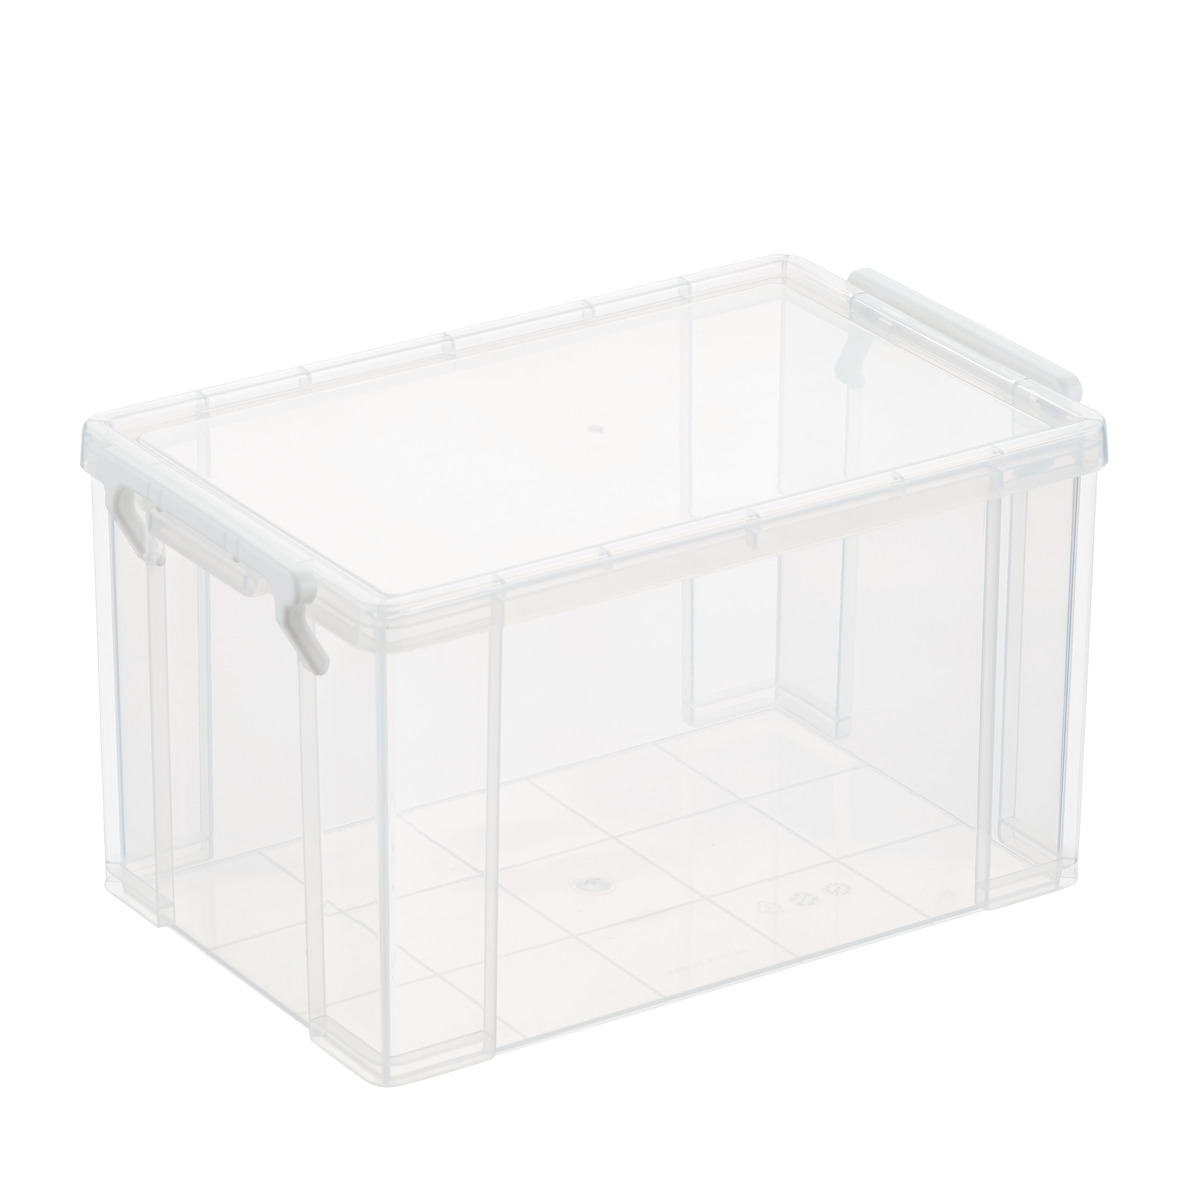 https://www.containerstore.com/catalogimages/379967/10077235-latch-box-clear-extra-large.jpg